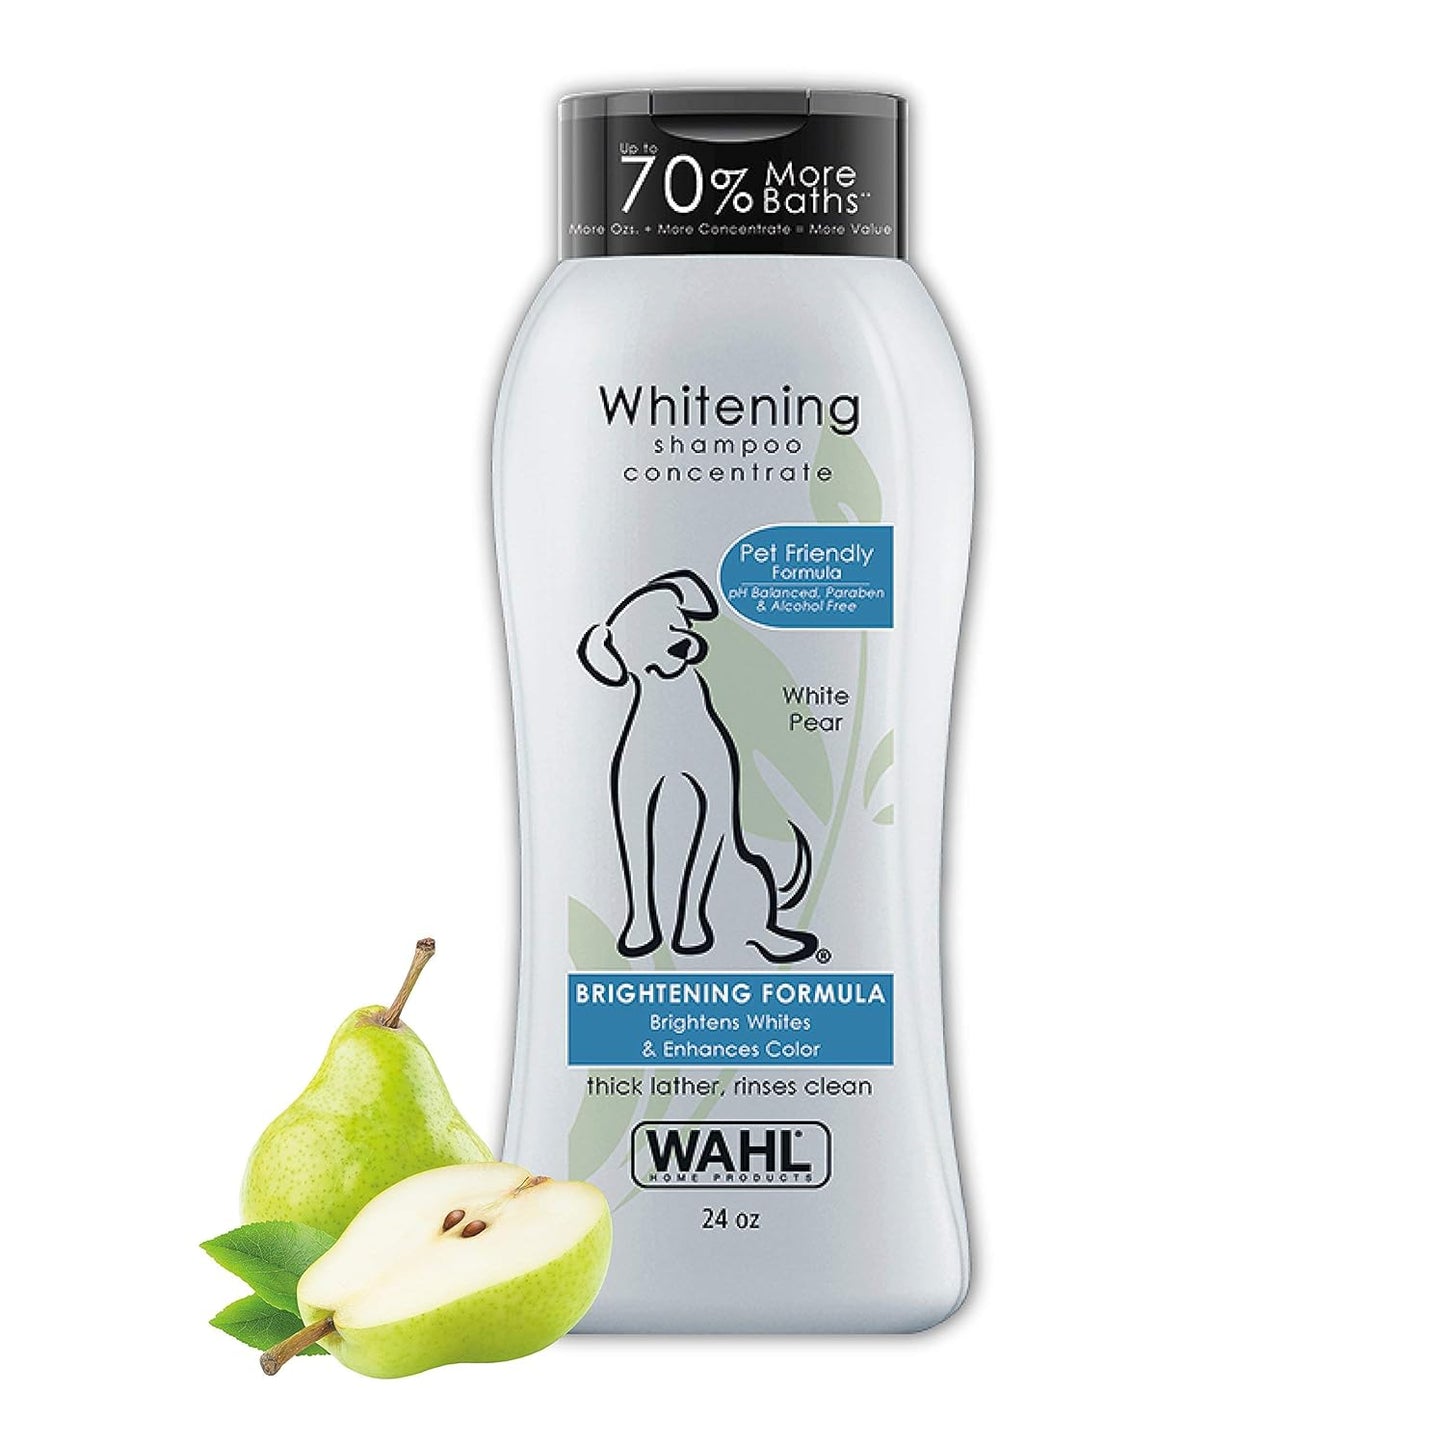 Wahl Whitening Shampoo White Pear Brightening Formula for Dogs 300ml